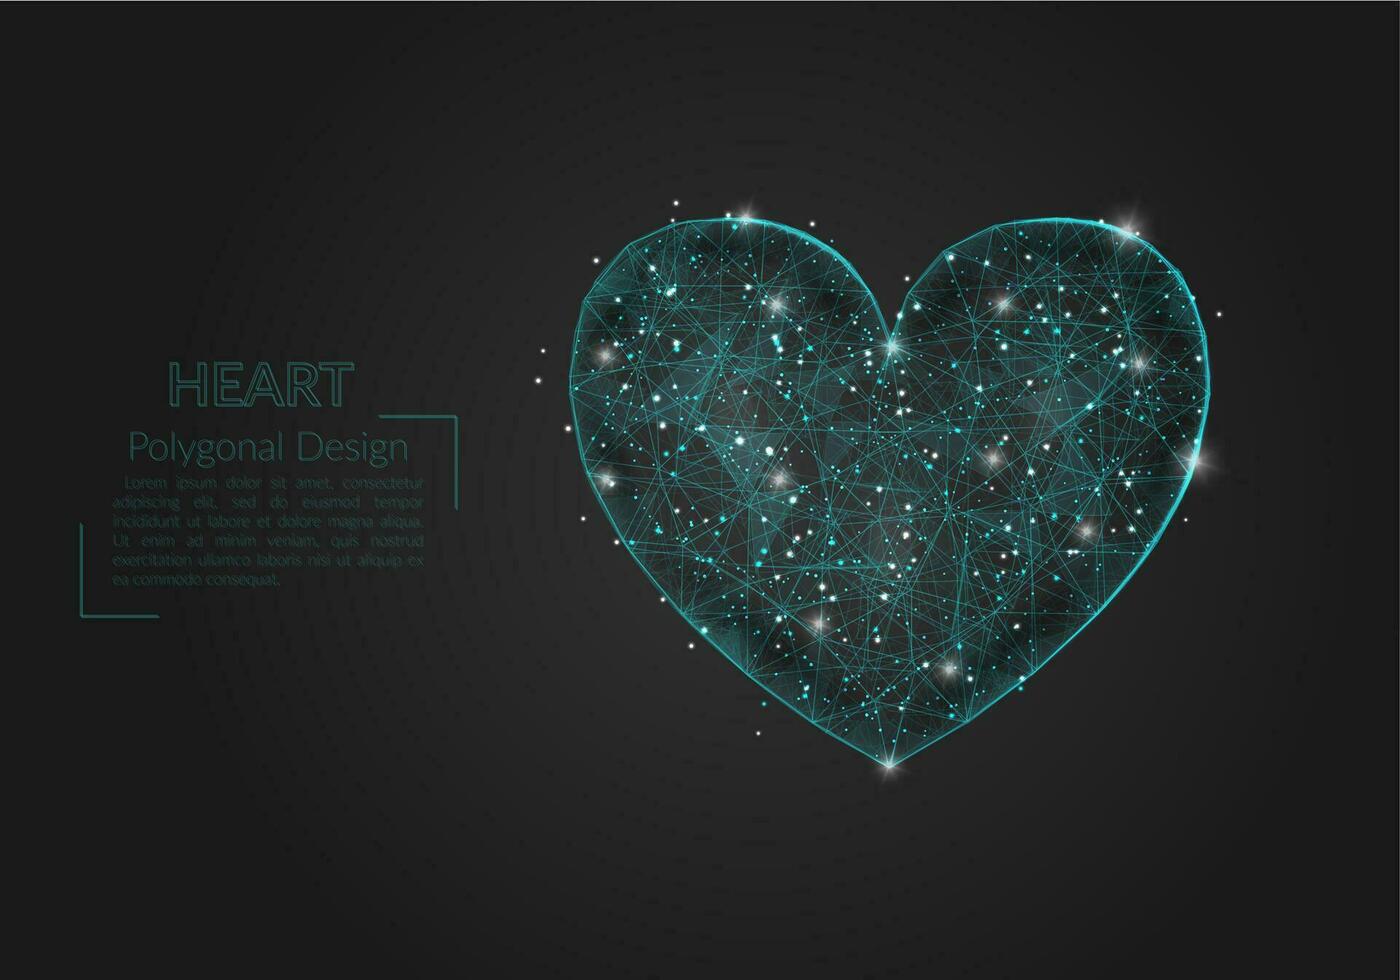 Abstract isolated blue image of a heart. Polygonal illustration looks like stars in the blask night sky in spase or flying glass shards. Digital design for website, web, internet vector